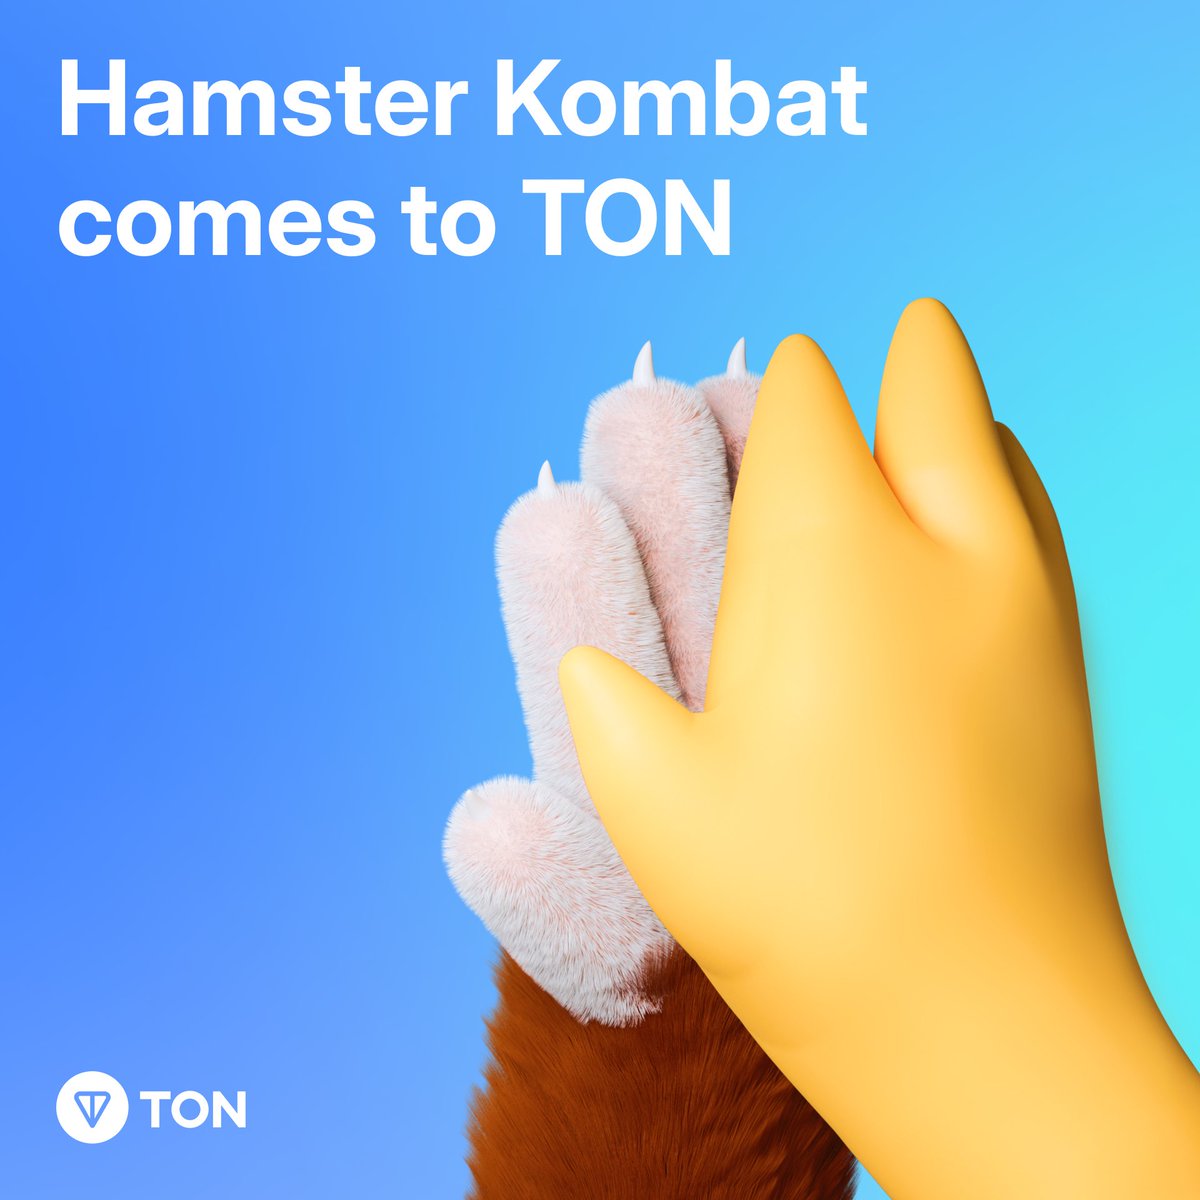 🐹 @hamster_kombat, a Tap-2-Earn management simulation game, is planning to launch its hamster ecosystem, including onchain assets, on #TON! Leveraging @telegram's viral social mechanisms combined with special reward cards and other features, the game has reached over 60M users